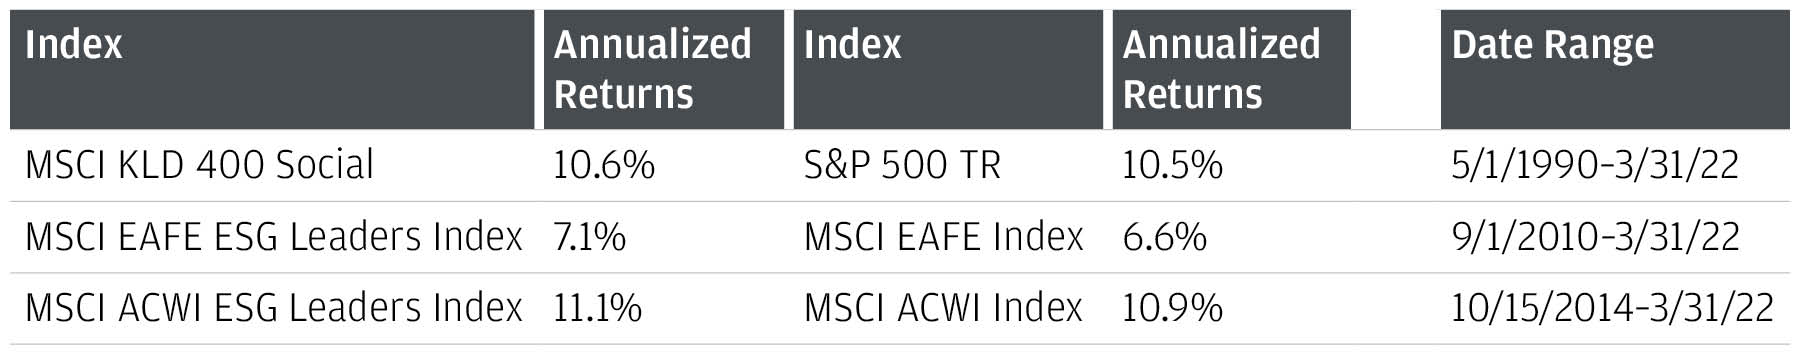 This table shows the performance of the MSCI KLD 400 Social Index, the MSCI EAFE ESG Leaders Index, and the MSCI ACWI ESG Leaders Index alongside their traditional benchmark counterparts.